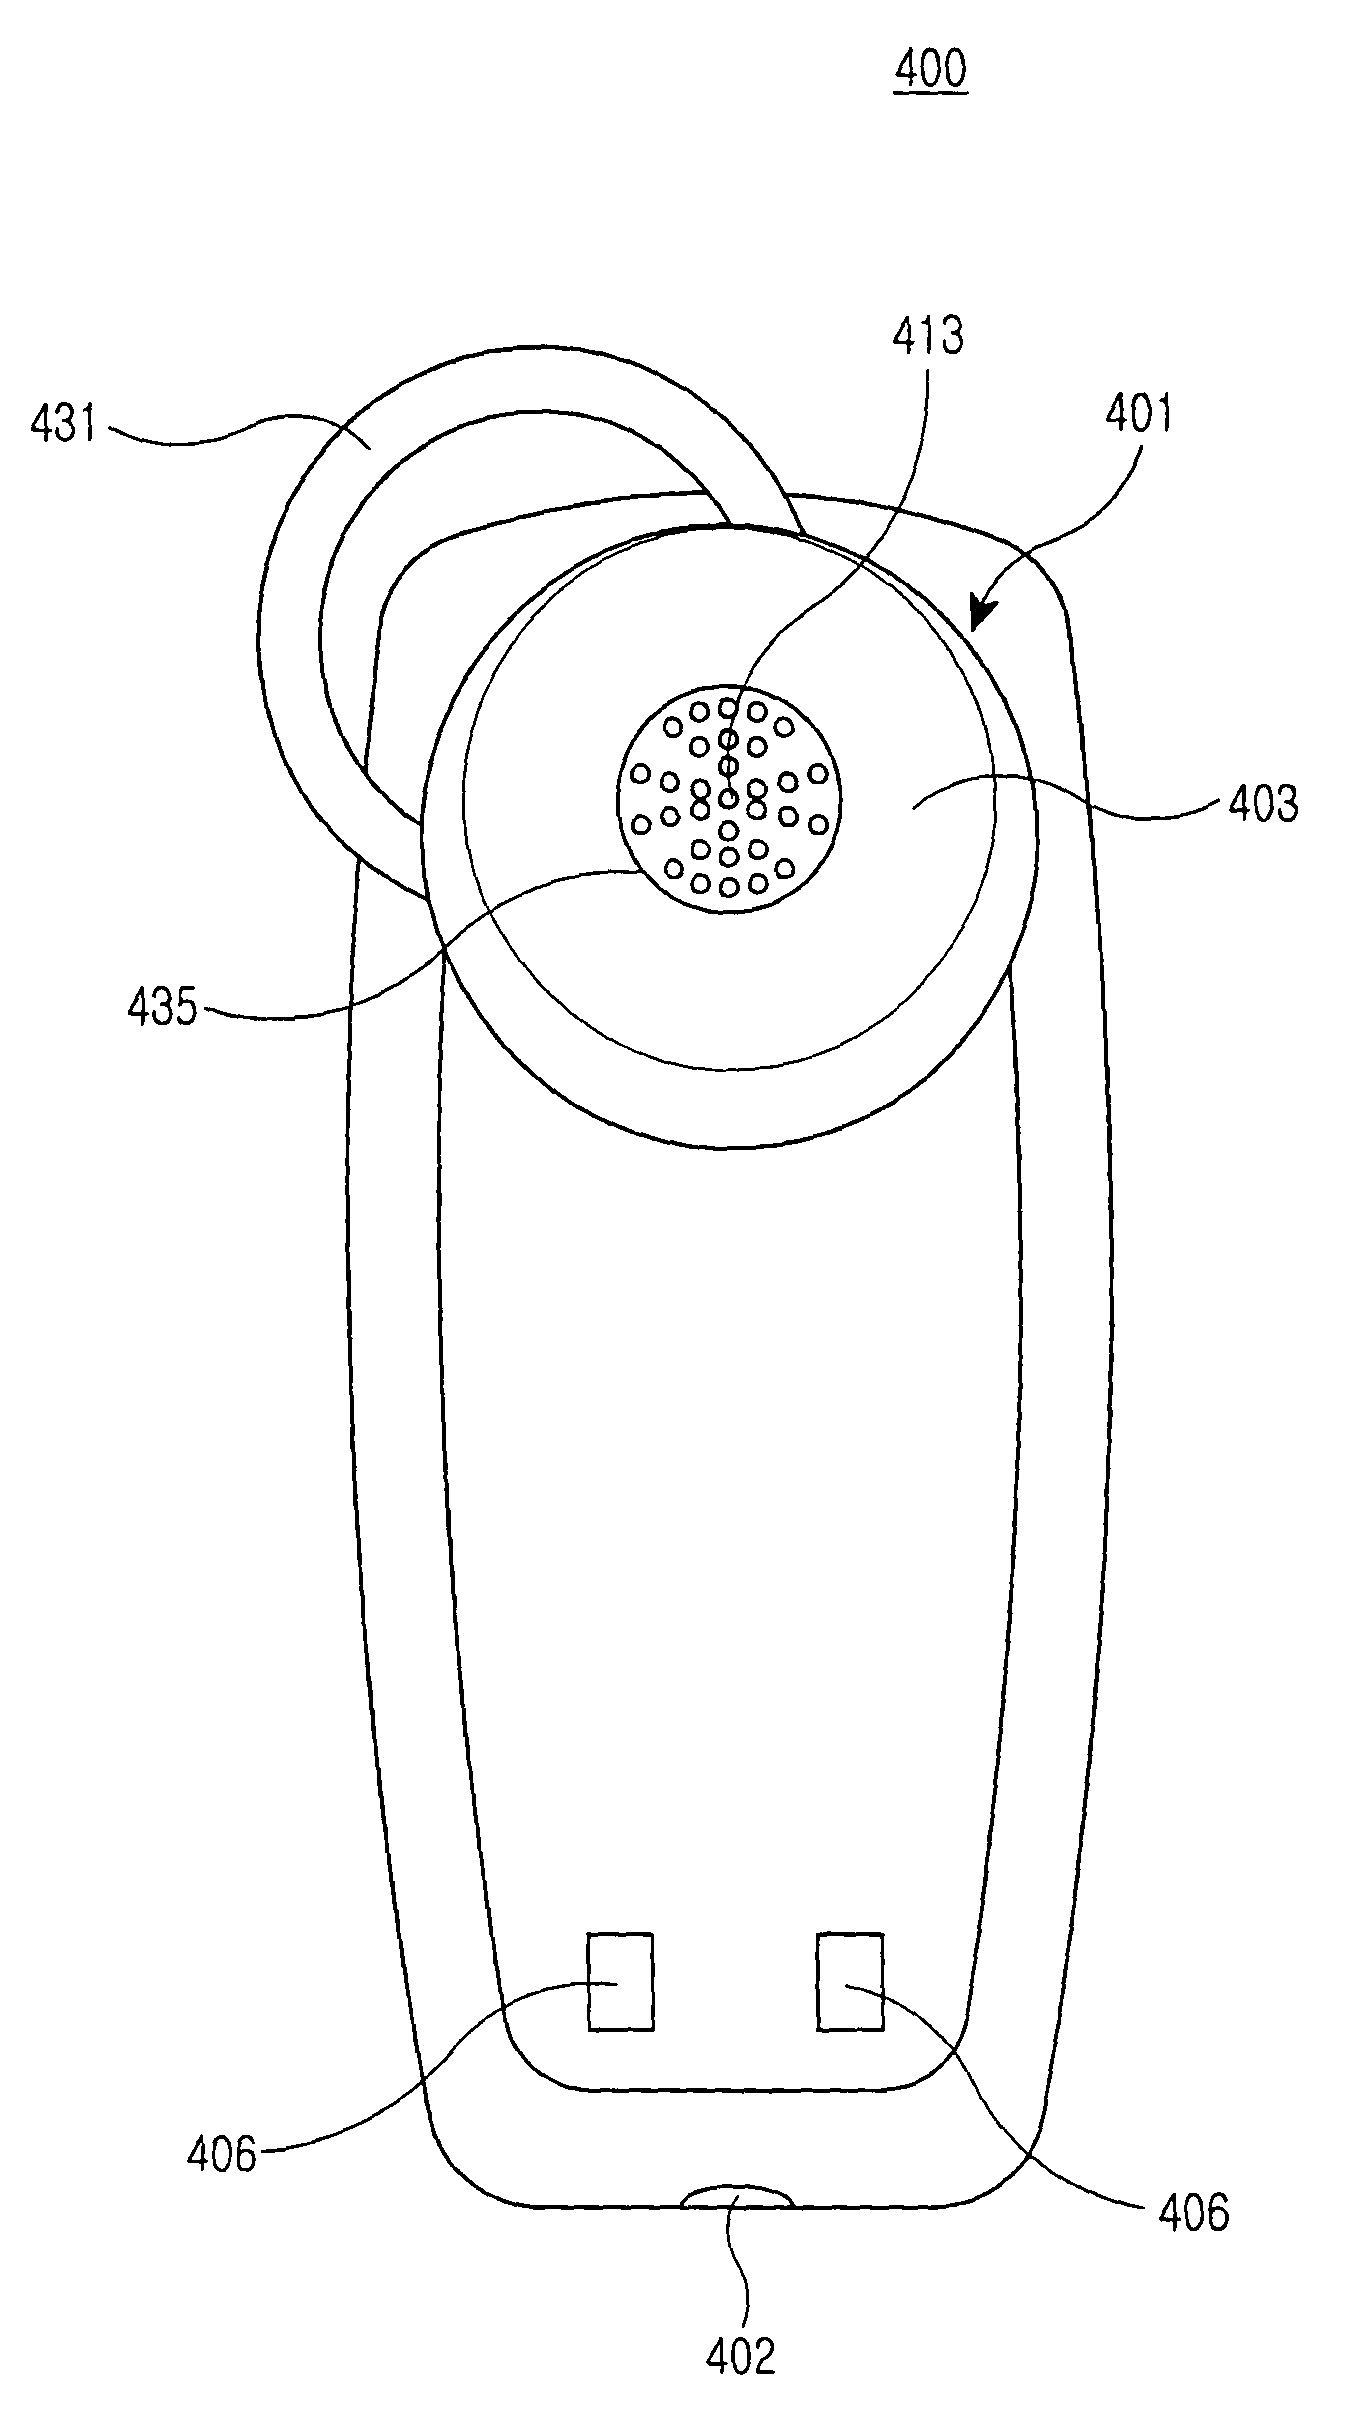 Charging cradle for a headset device and an earphone cover for the headset device